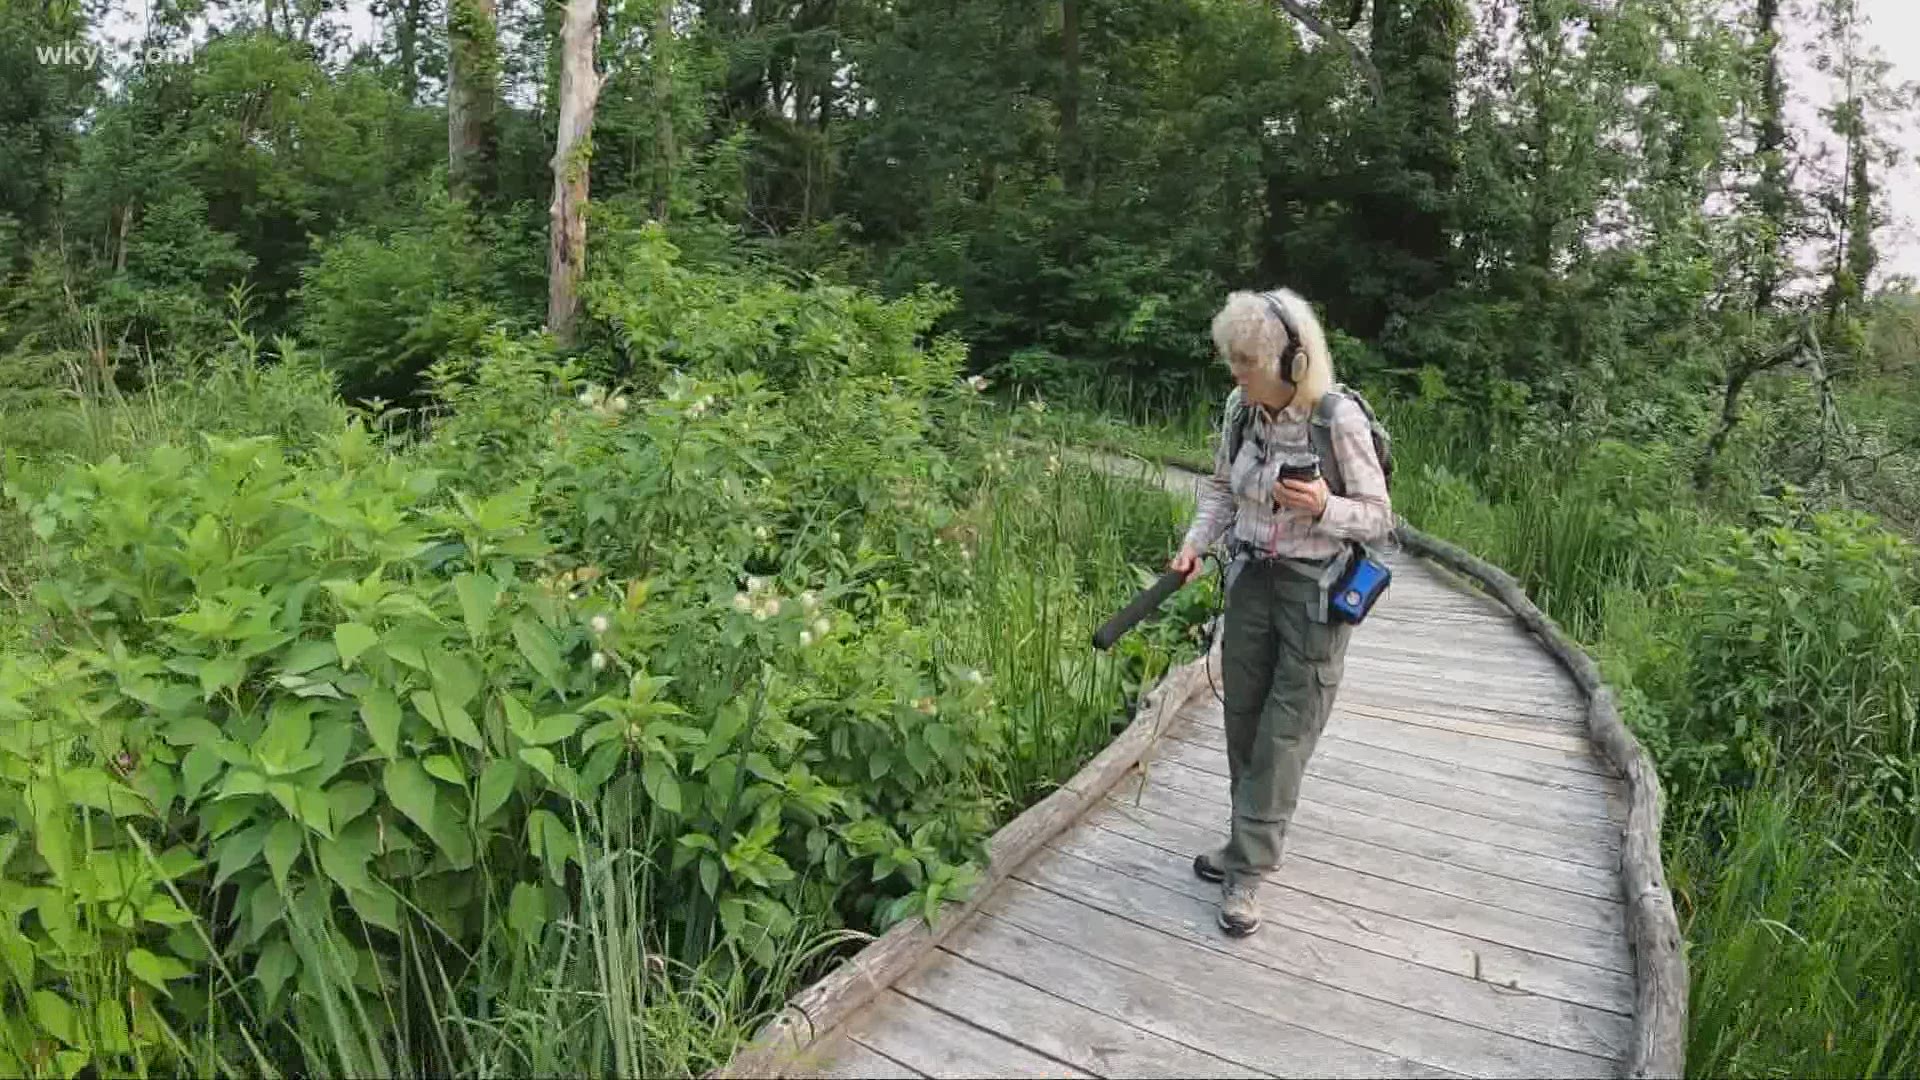 One local woman records and identifies insects using their calls, using them to track changes in the environment